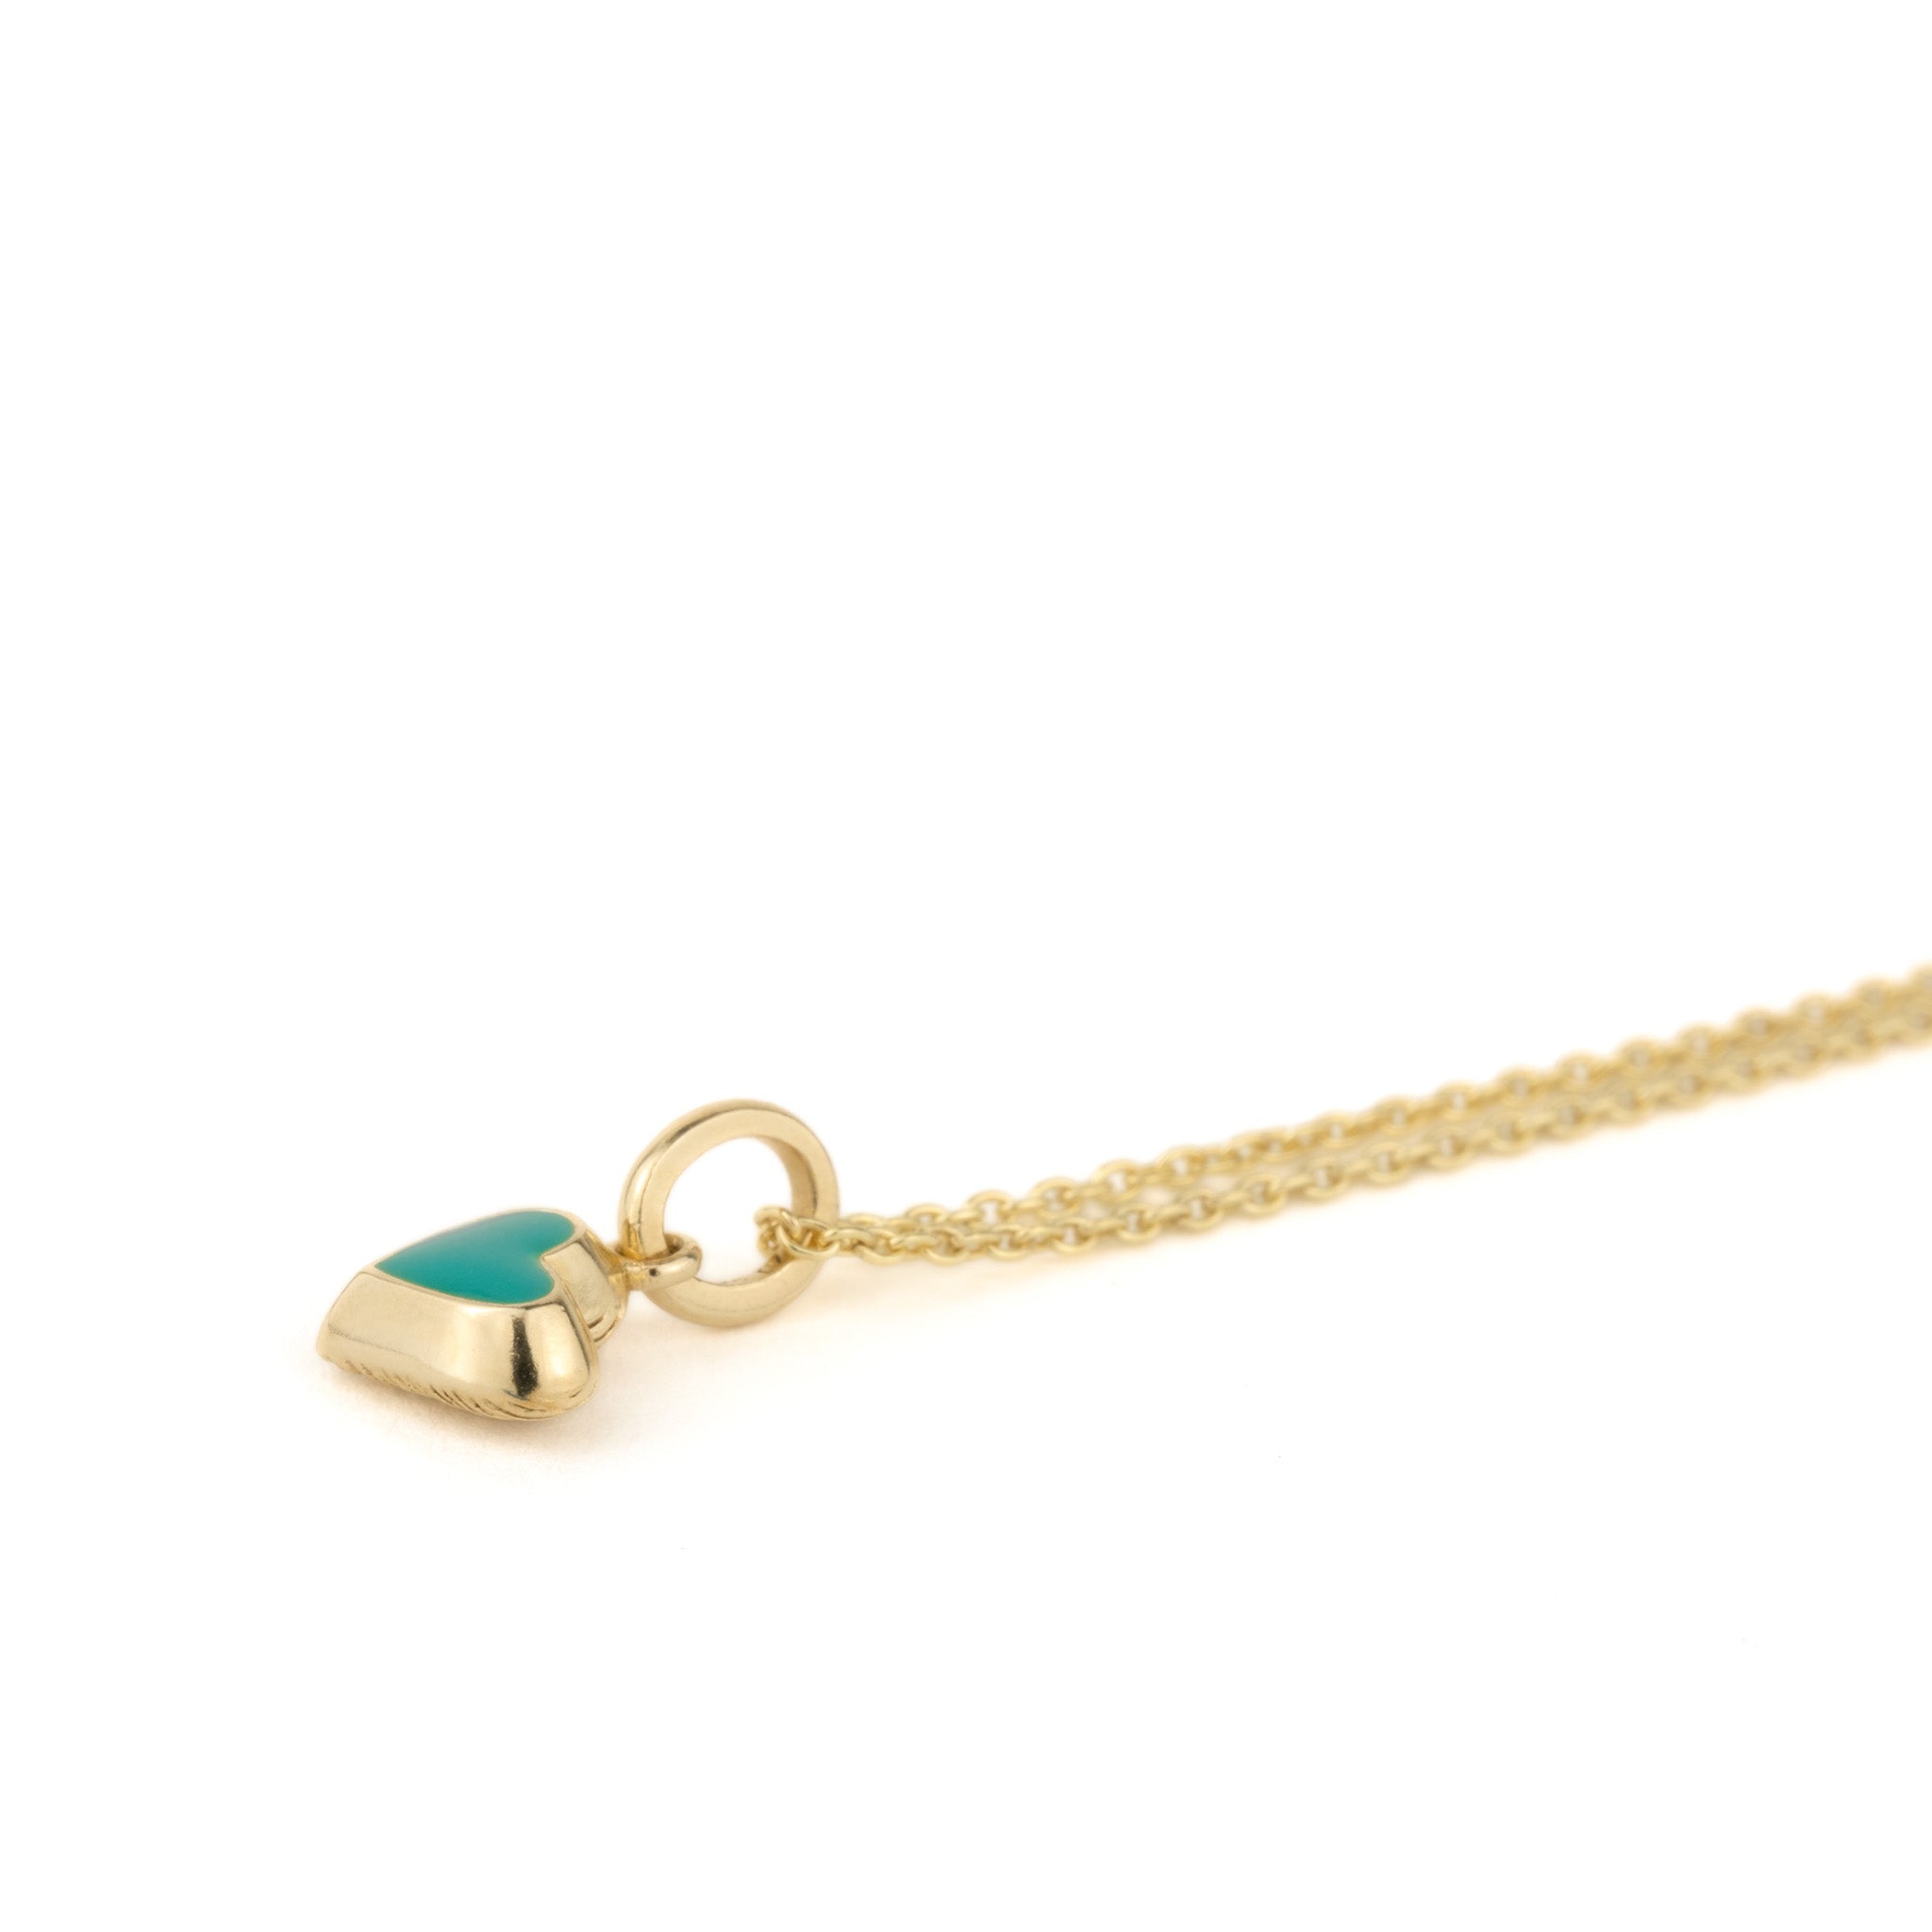 A Aiden Jae Mini Reversible Heart Charm Necklace with a turquoise stone on it.